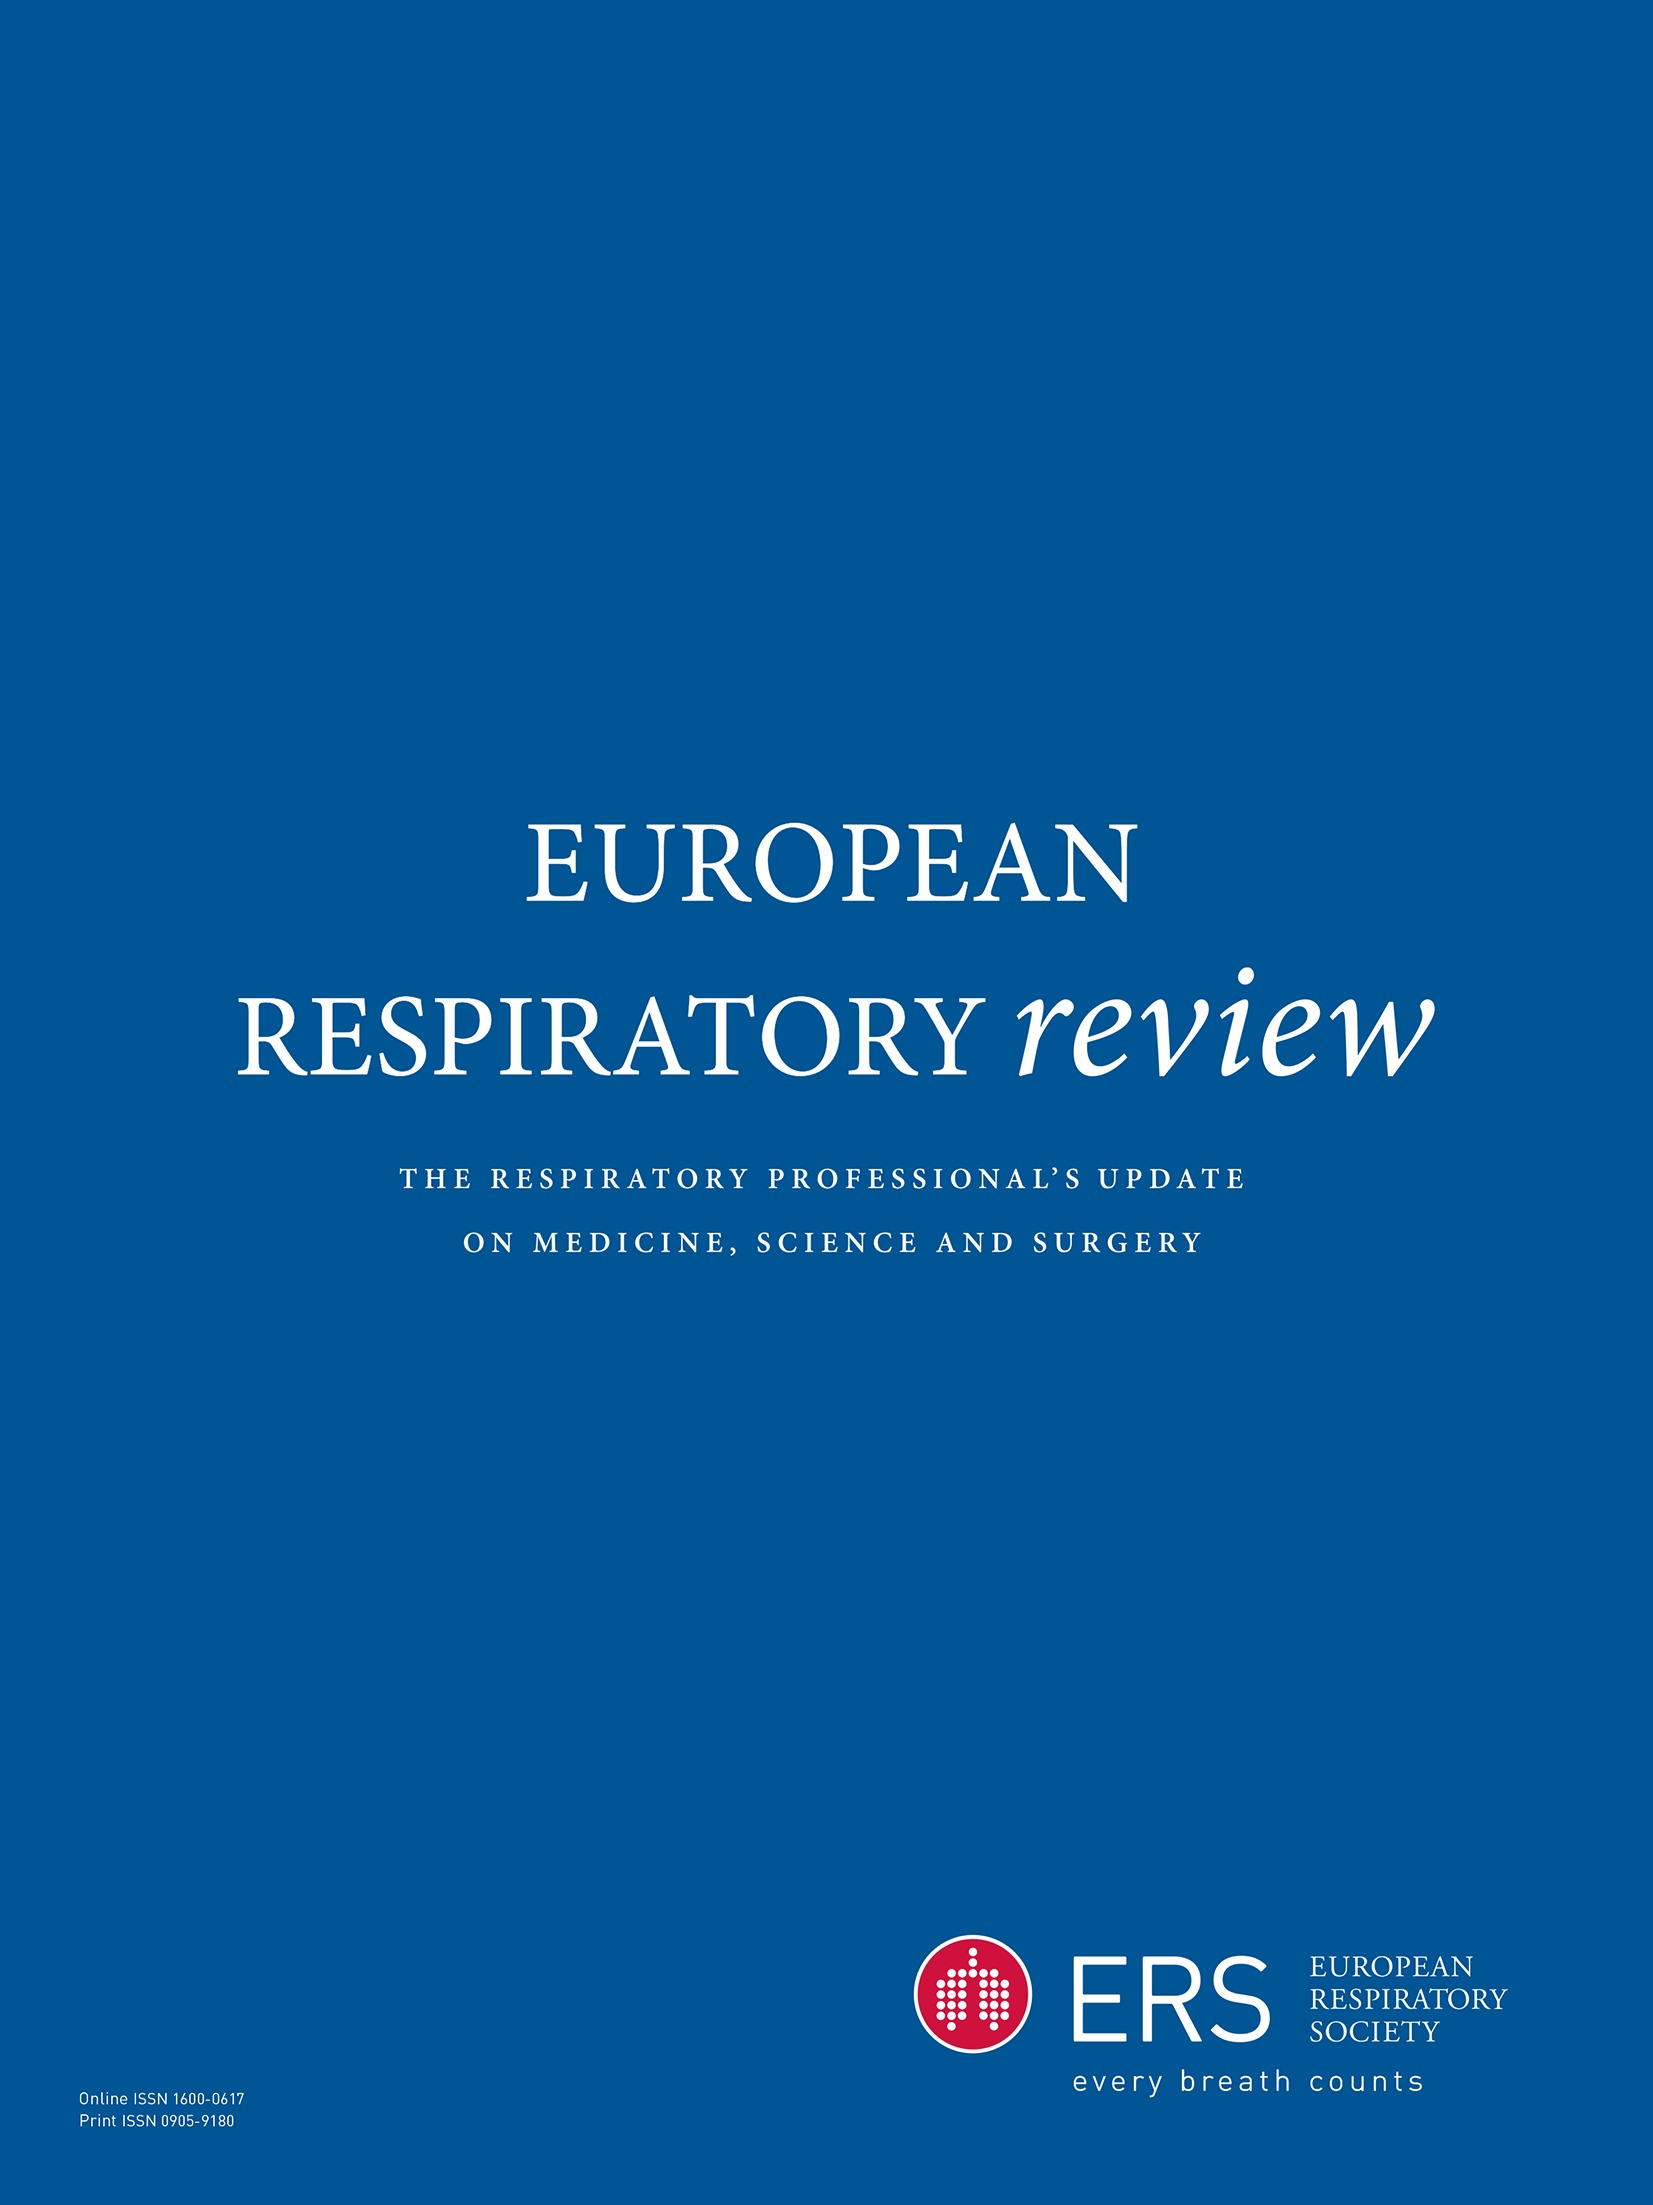 Eradication treatment for Pseudomonas aeruginosa infection in adults with bronchiectasis: a systematic review and meta-analysis